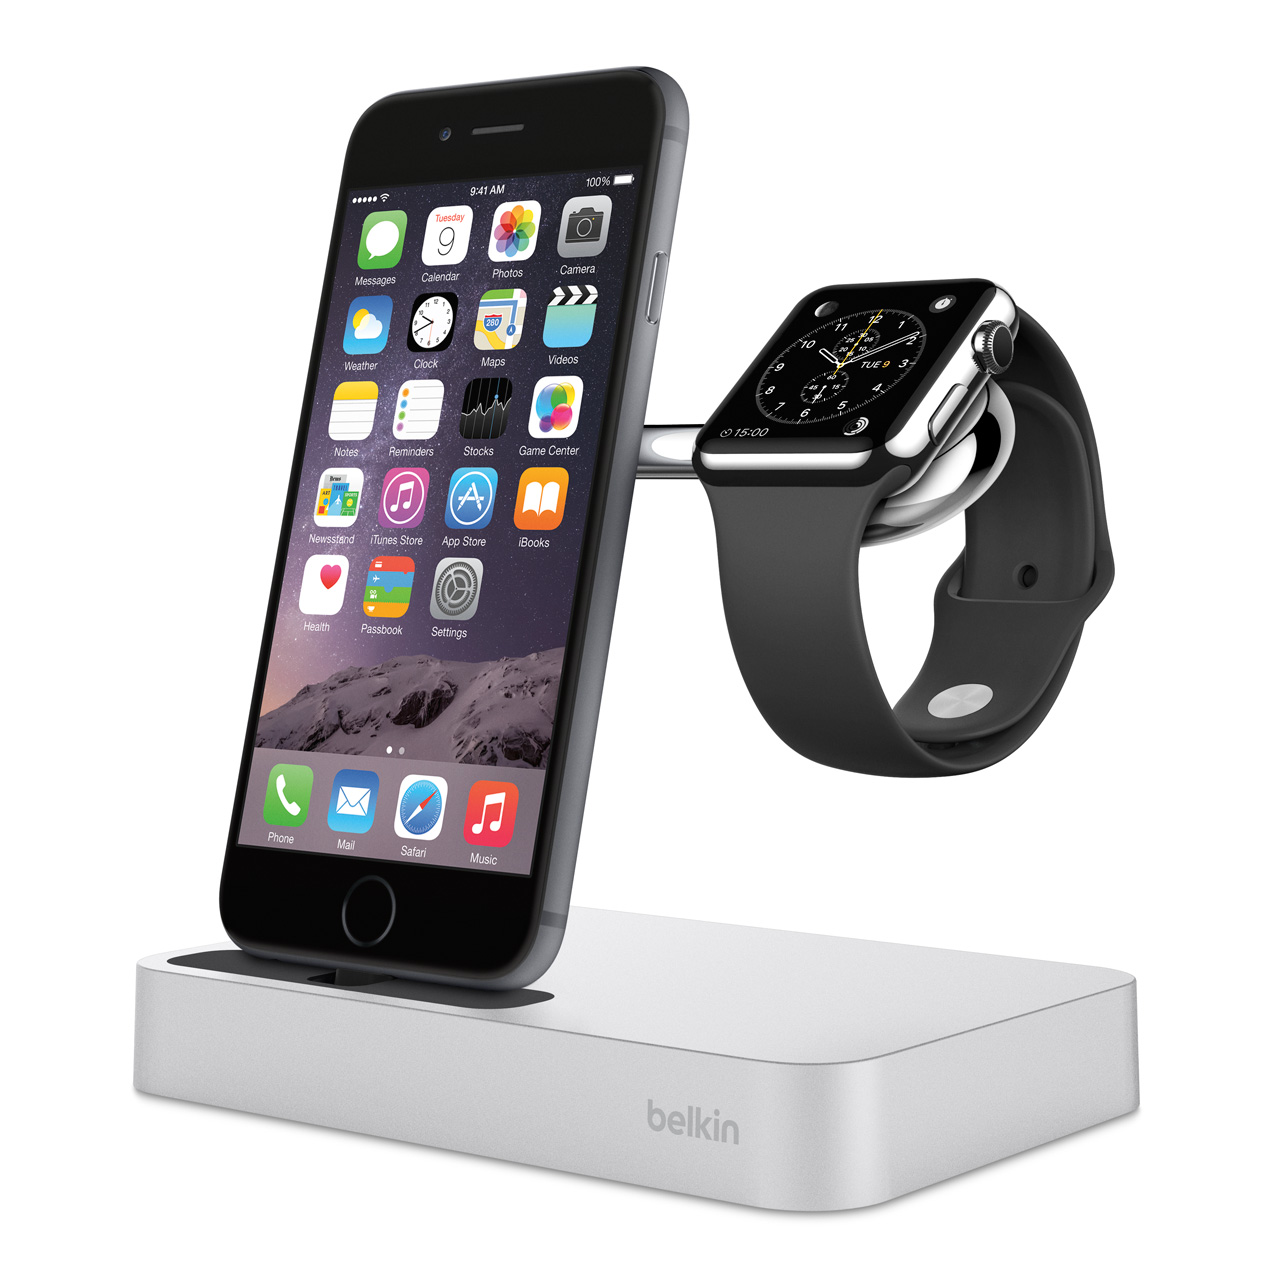 Belkin Charge Dock Offers Simultaneous Charging for iPhone and Apple Watch